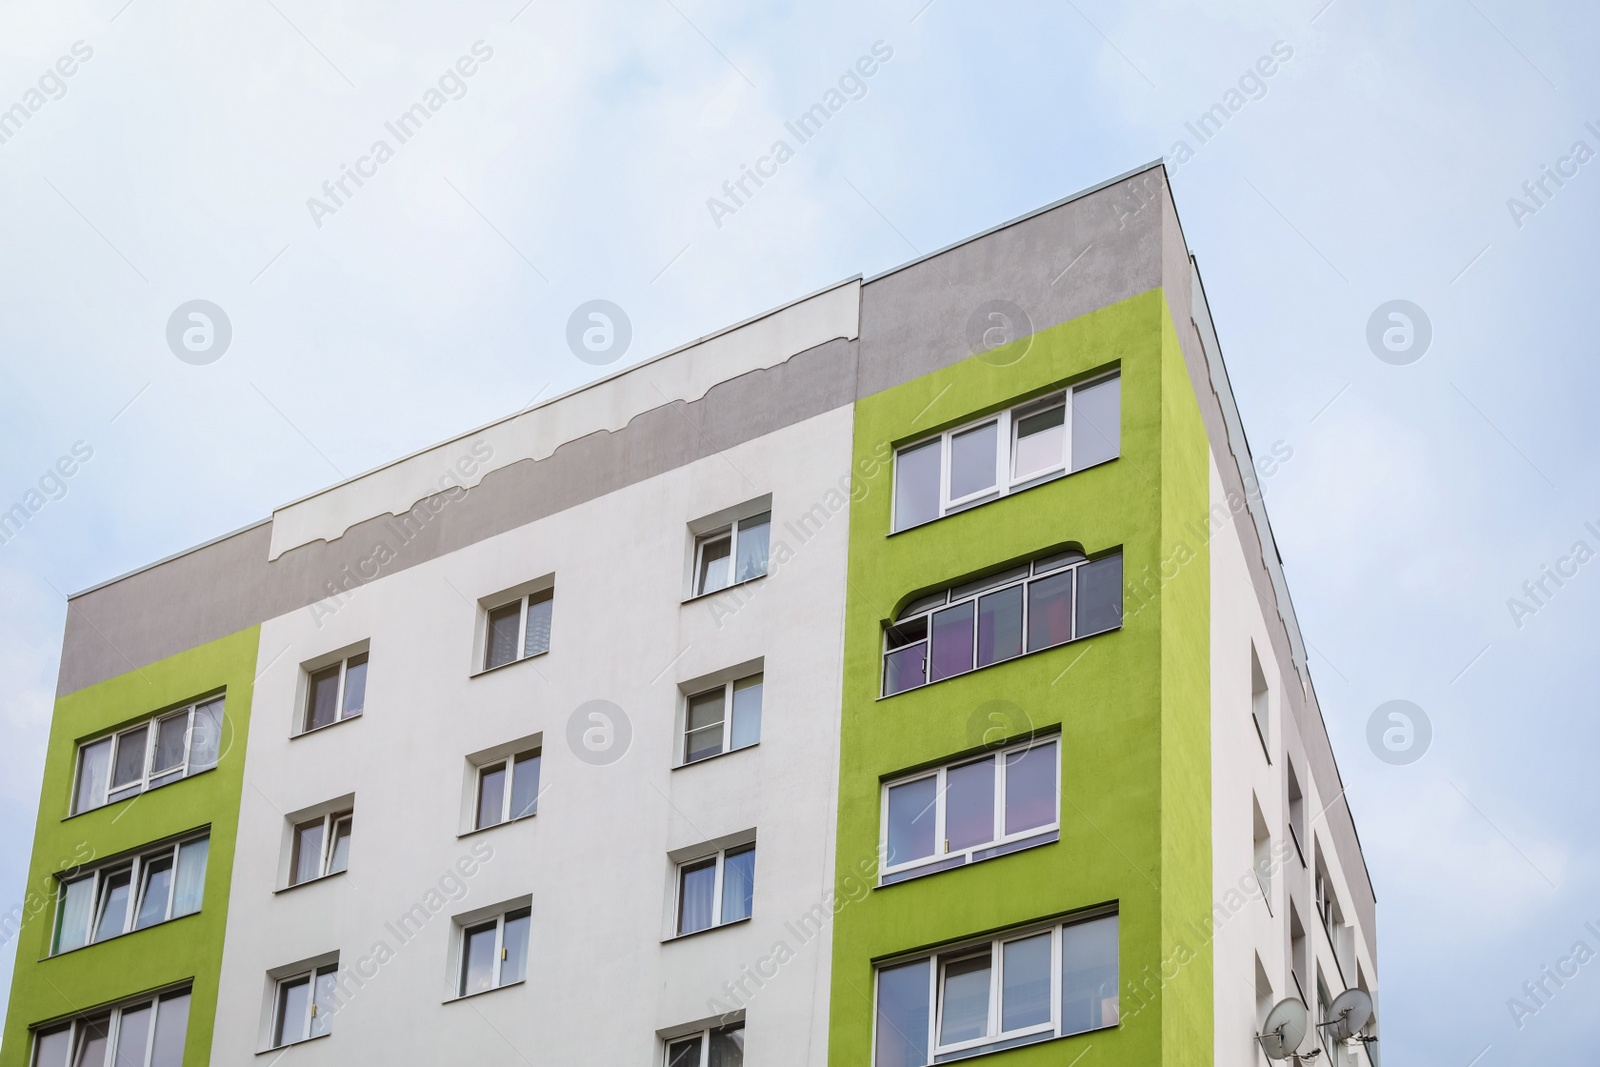 Photo of Multistorey apartment building against cloudy sky, low angle view